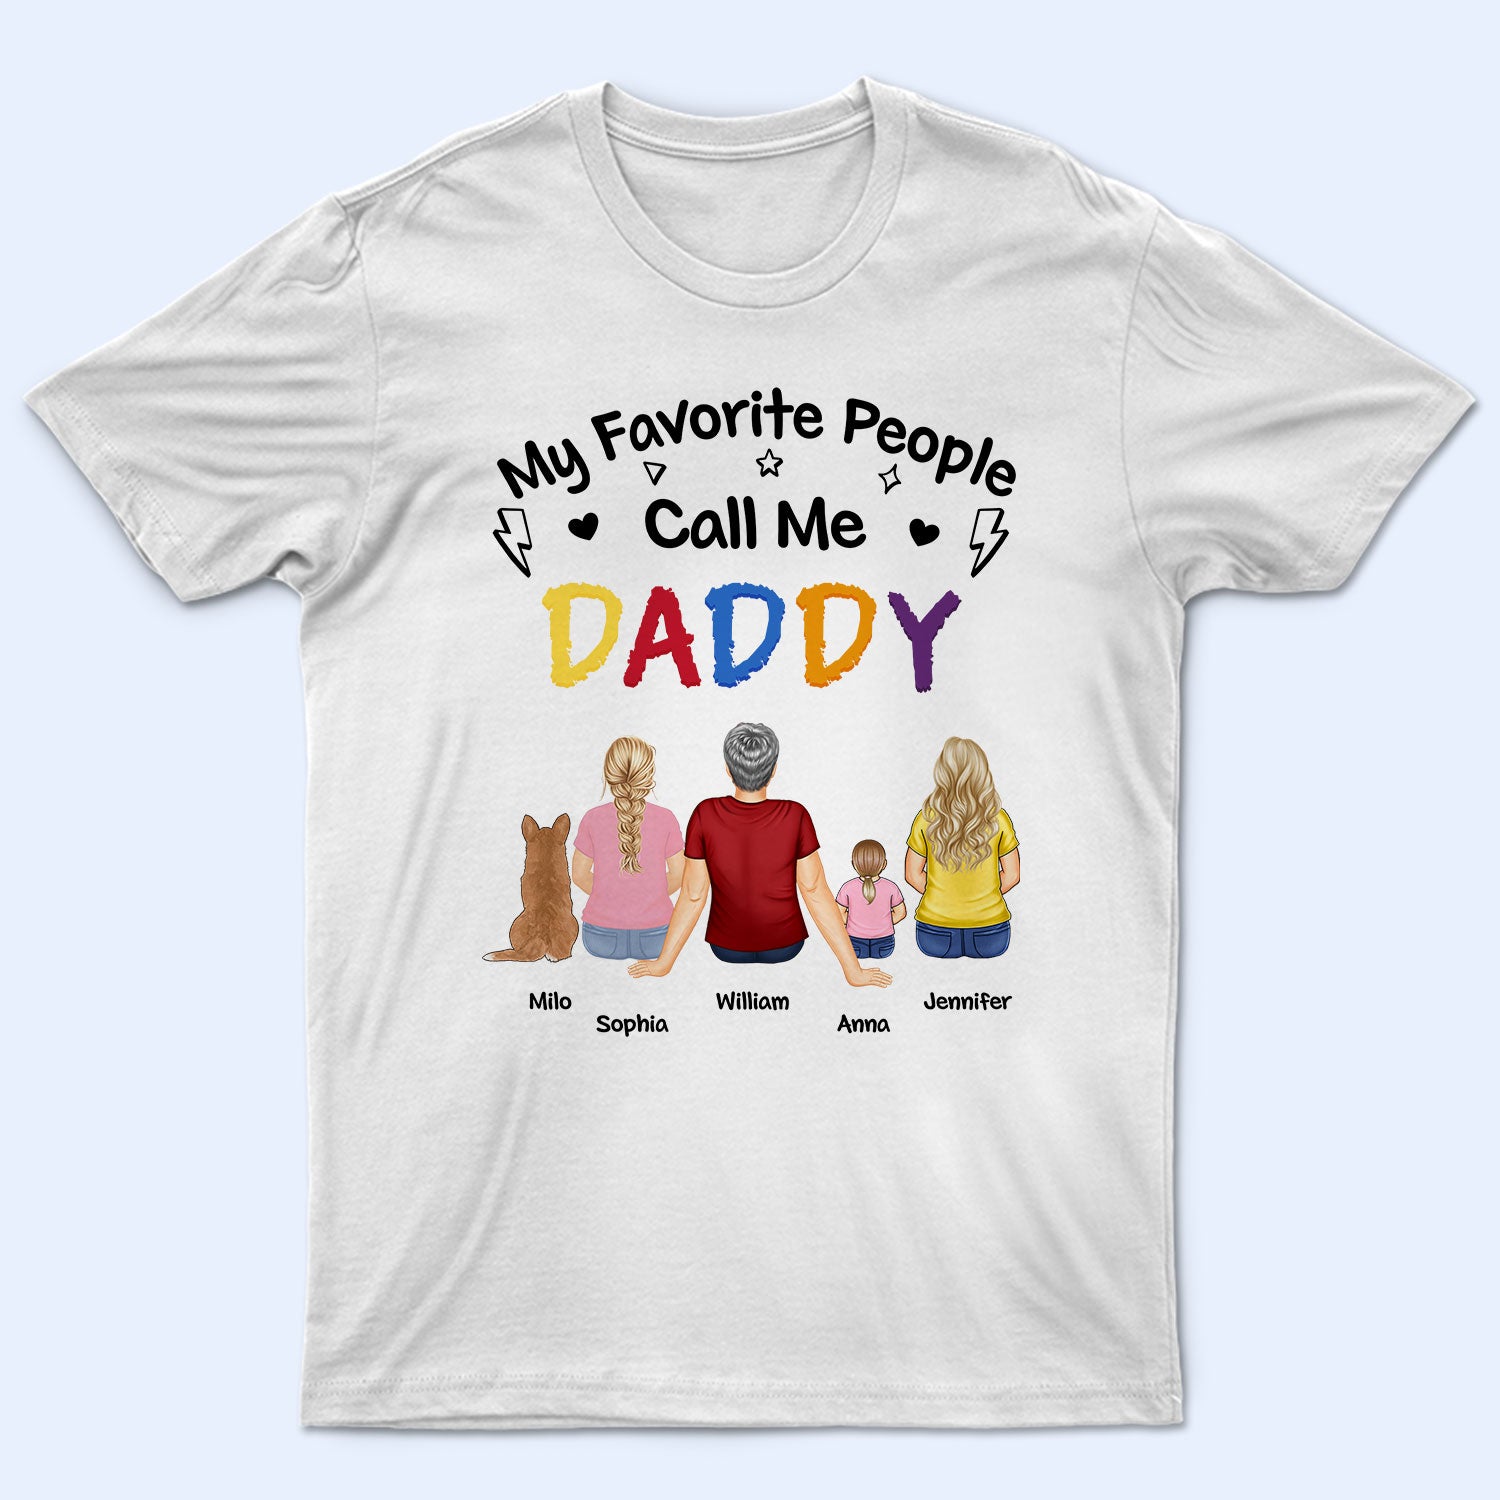 My Favorite People Call Me - Gift For Dad, Grandpa - Personalized T Shirt